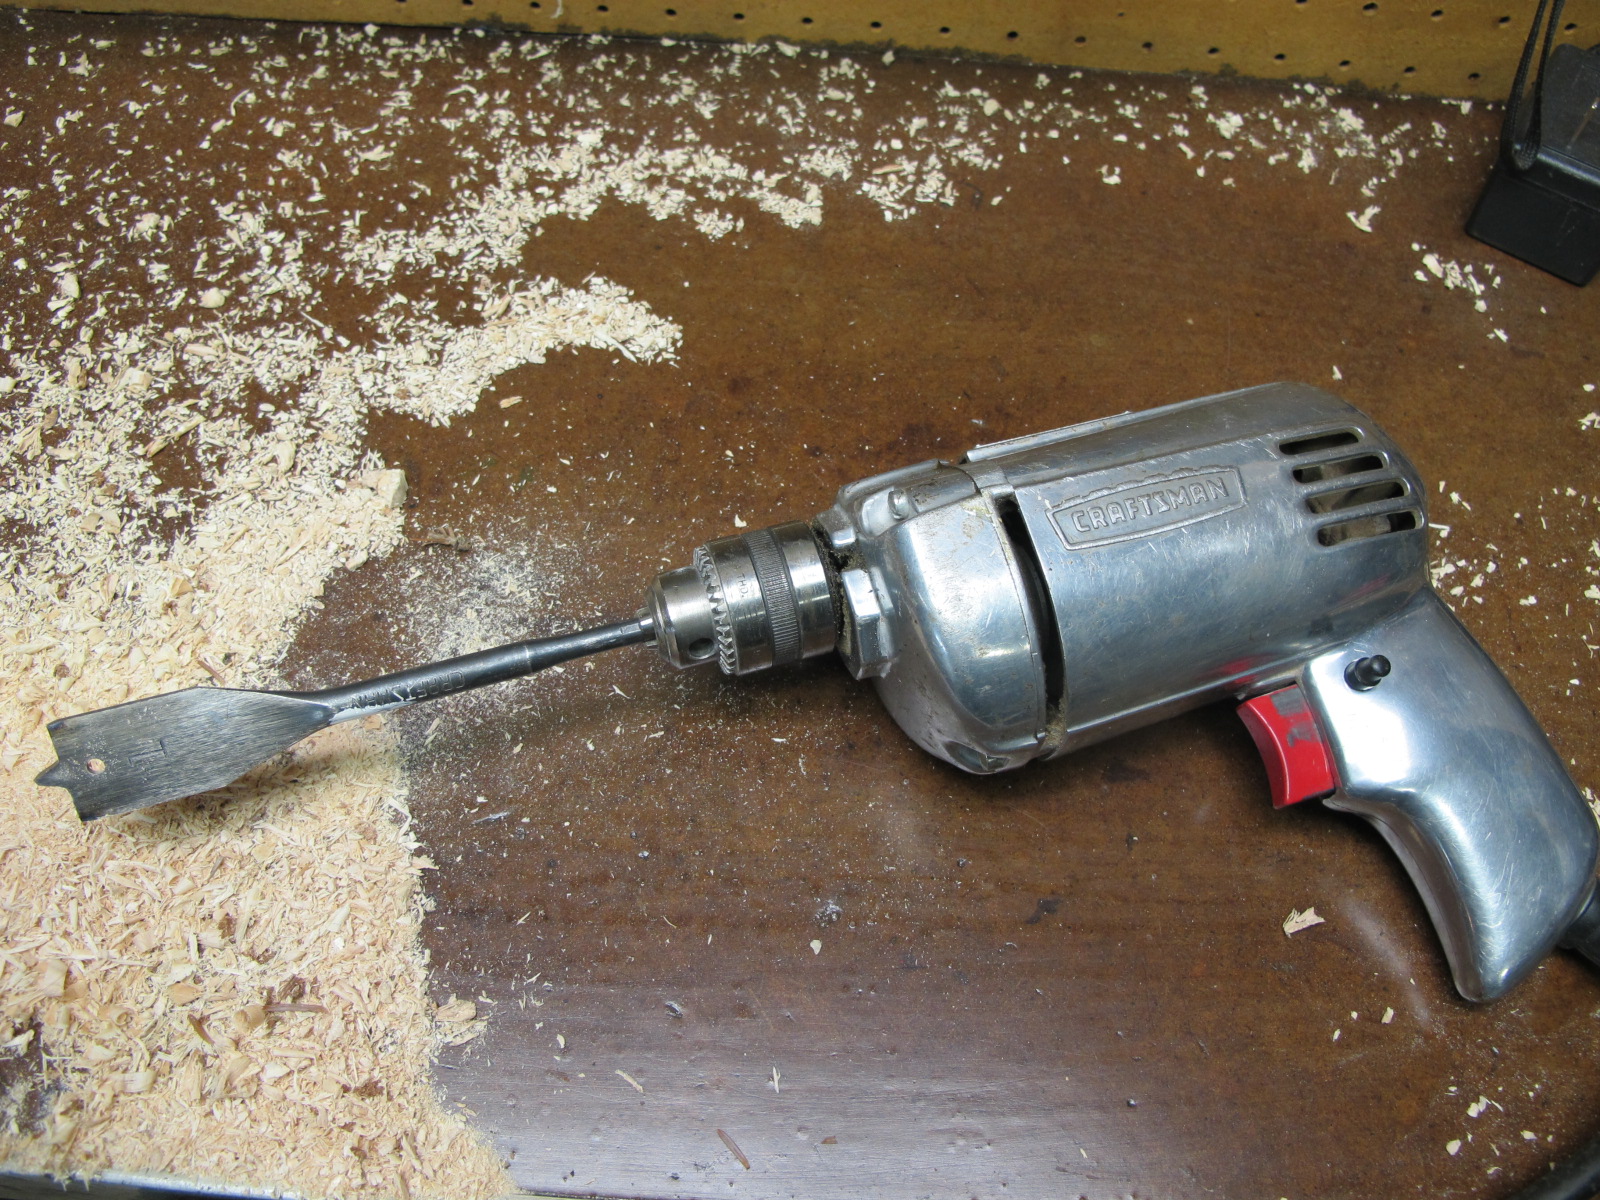  Use electric drill with 1-1/4" bit to bore a hole in the bottom 4" deep. 